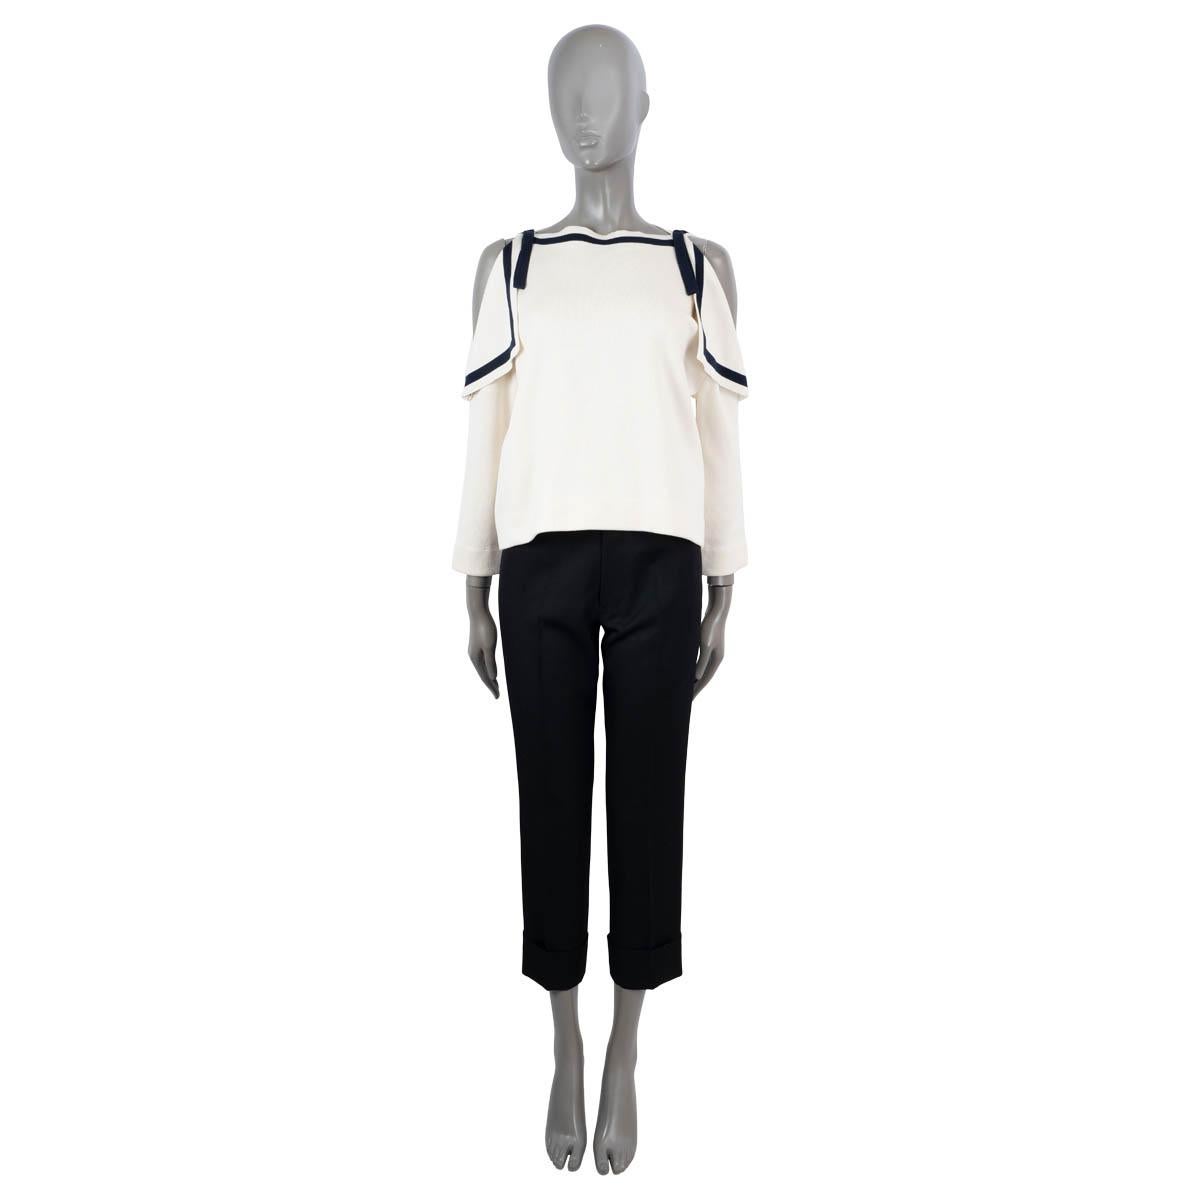 100% authentic Oscar de la Renta cold shoulder marine knit top in off-white and navy blue silk (59%) and cotton (41%). Features self-tie mesh at the shoulder and 3/4 sleeves. Unlined. Has been worn and is in excellent condition.

Measurements
Tag